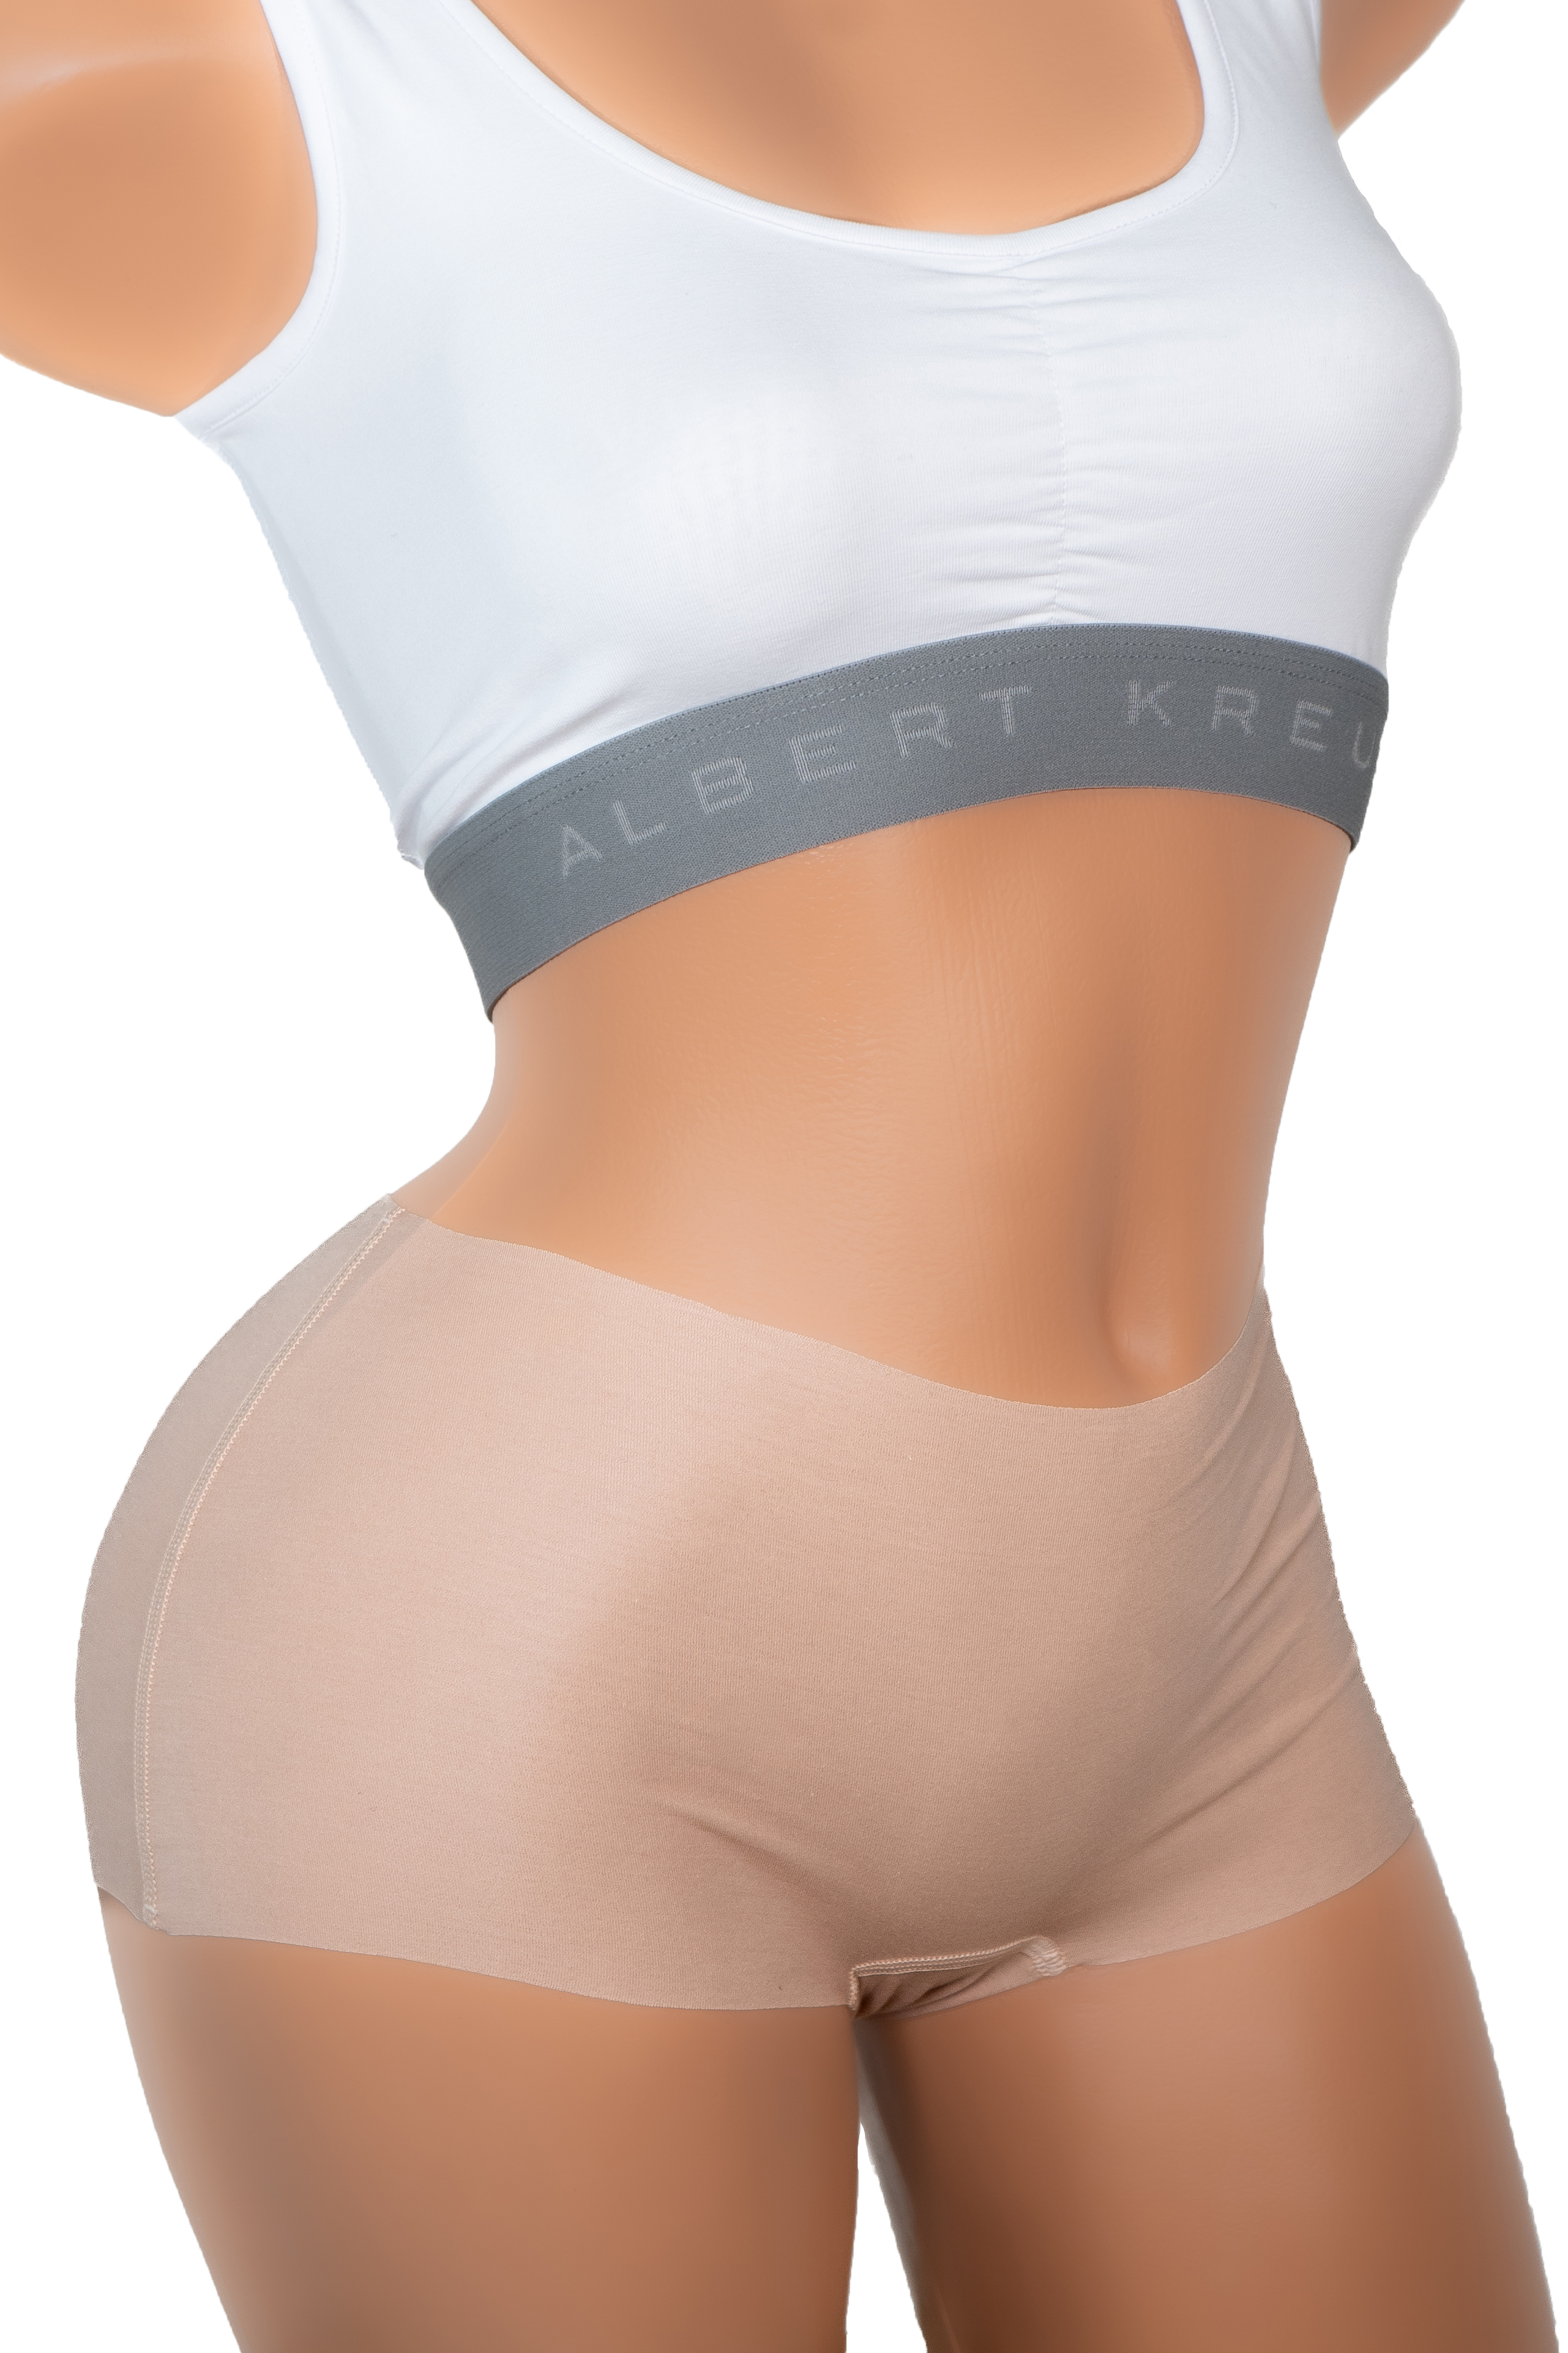 Women's Seamless Invisible Boyshort With Cotton Gusset - Buy China  Wholesale Seamless Invisible,boyshort,cotton Gusset Panty $2